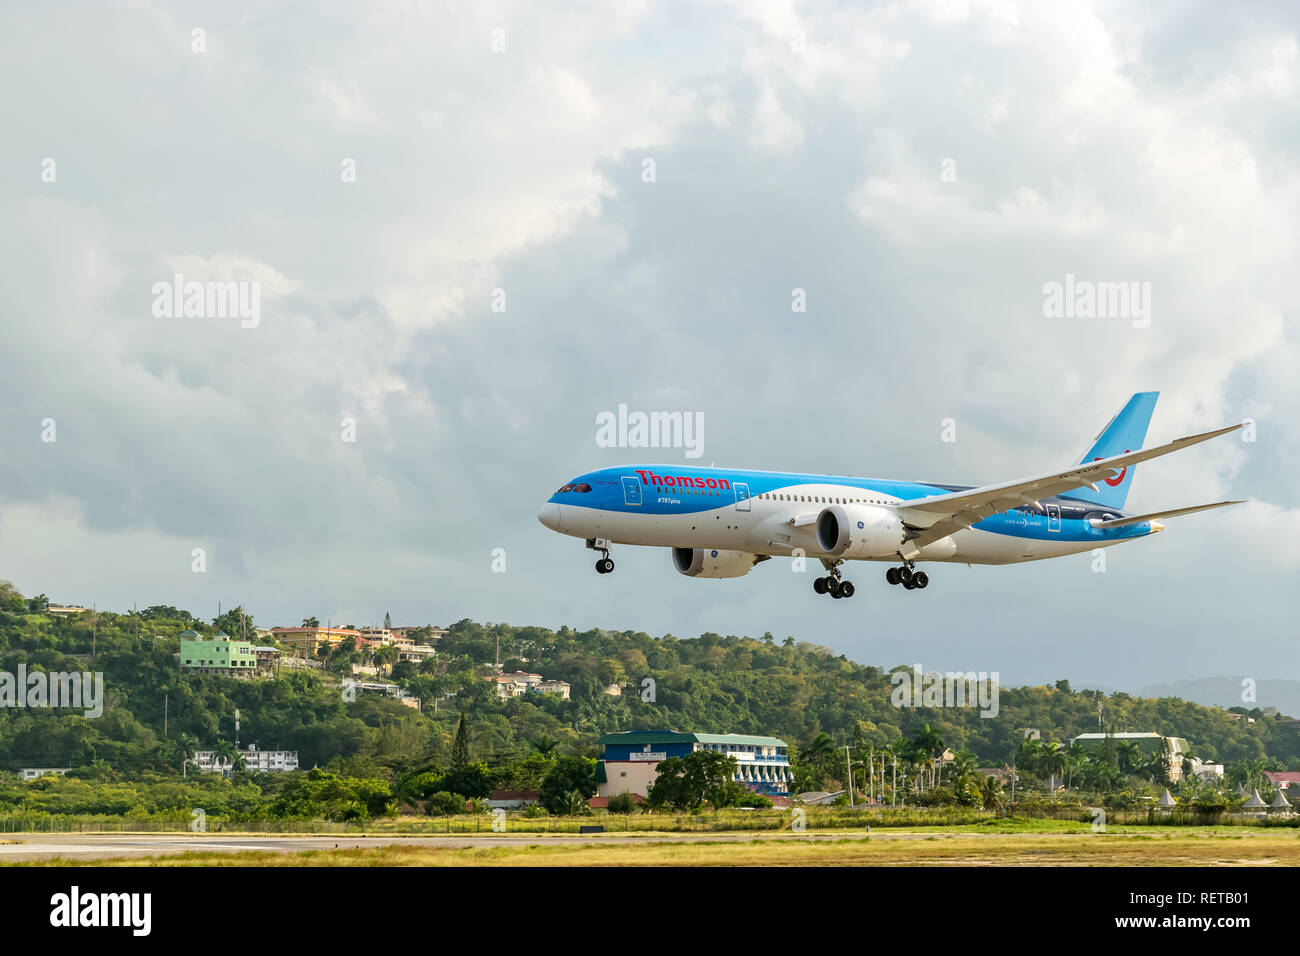 Montego Bay, Jamaica - February 18 2015: Thomson Airways (TUI) boeing aircraft landing at the Sangster International Airport in Montego Bay, Jamaica Stock Photo